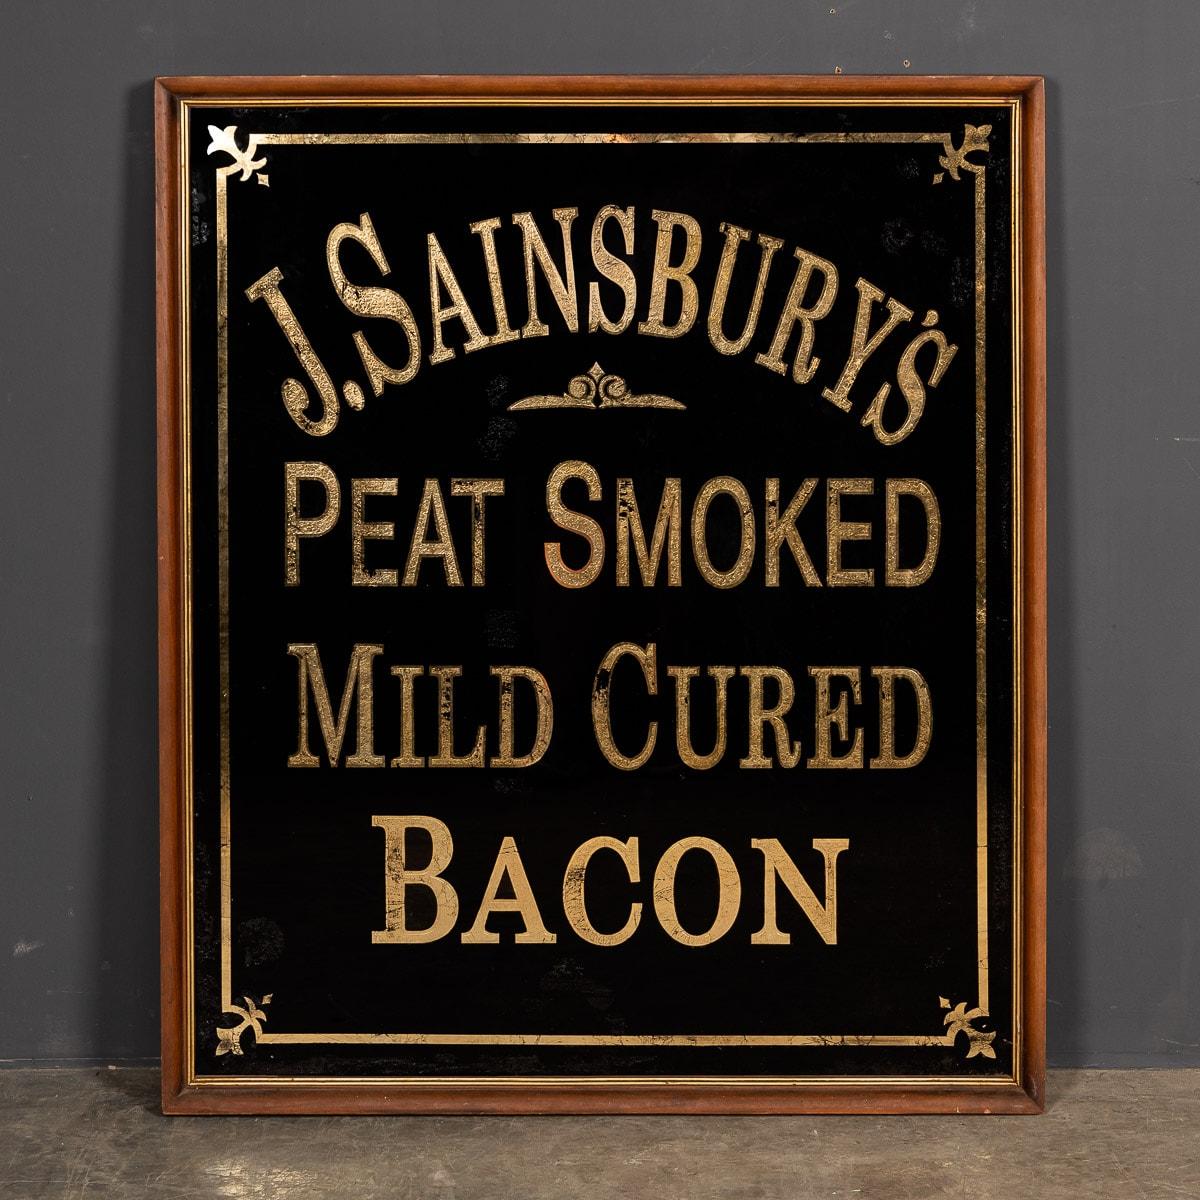 A mid 20th Century English J. Sainsbury's advertising mirror in an original oak frame. Advertising bacon for J Sainsbury, painted in black and gold lettering.

CONDITION
In Good Condition. Wear as expected with age. Please refer to photographs.